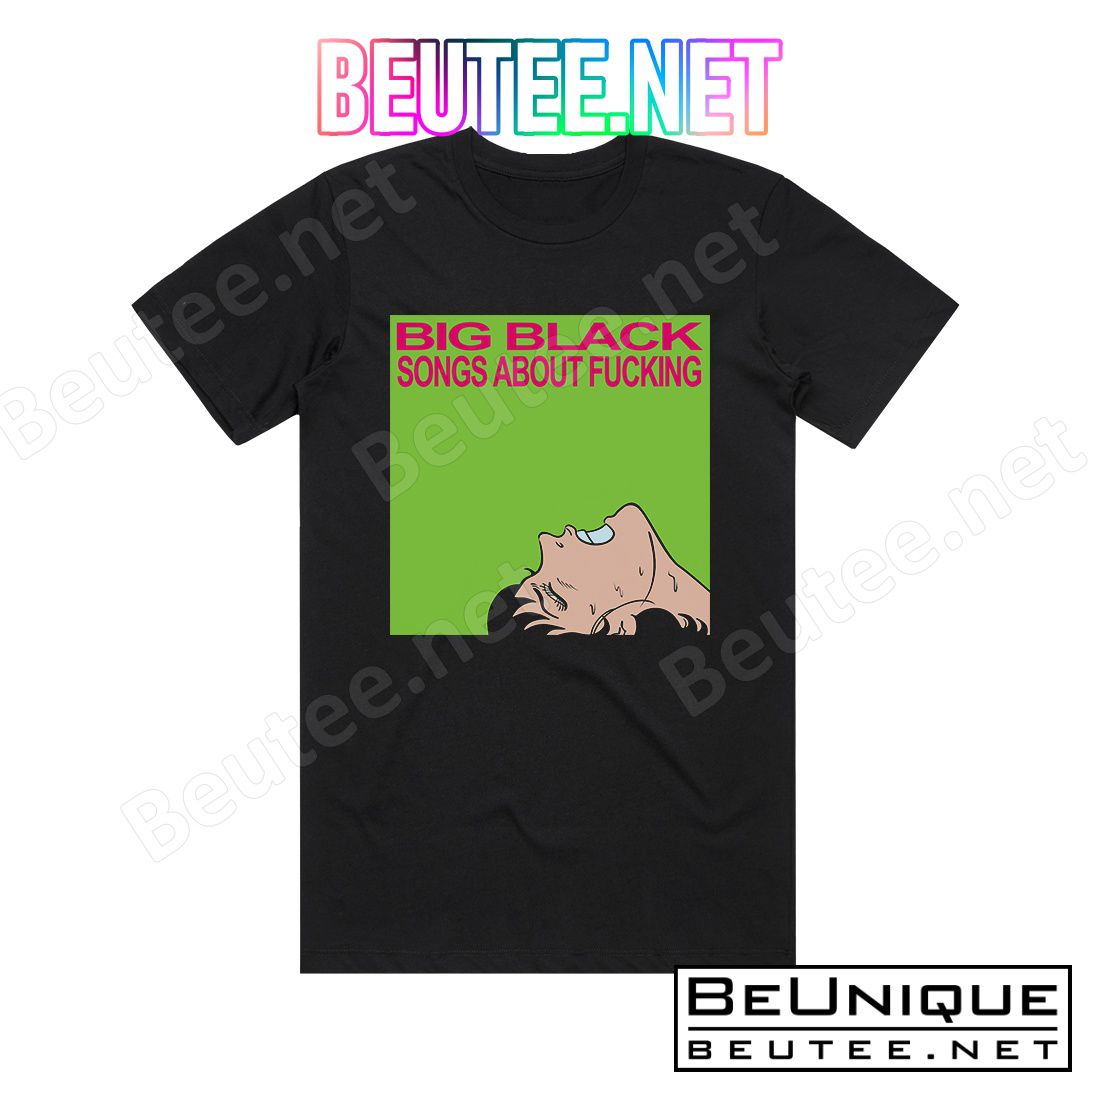 Big Black Songs About Fucking 3 Album Cover T-Shirt